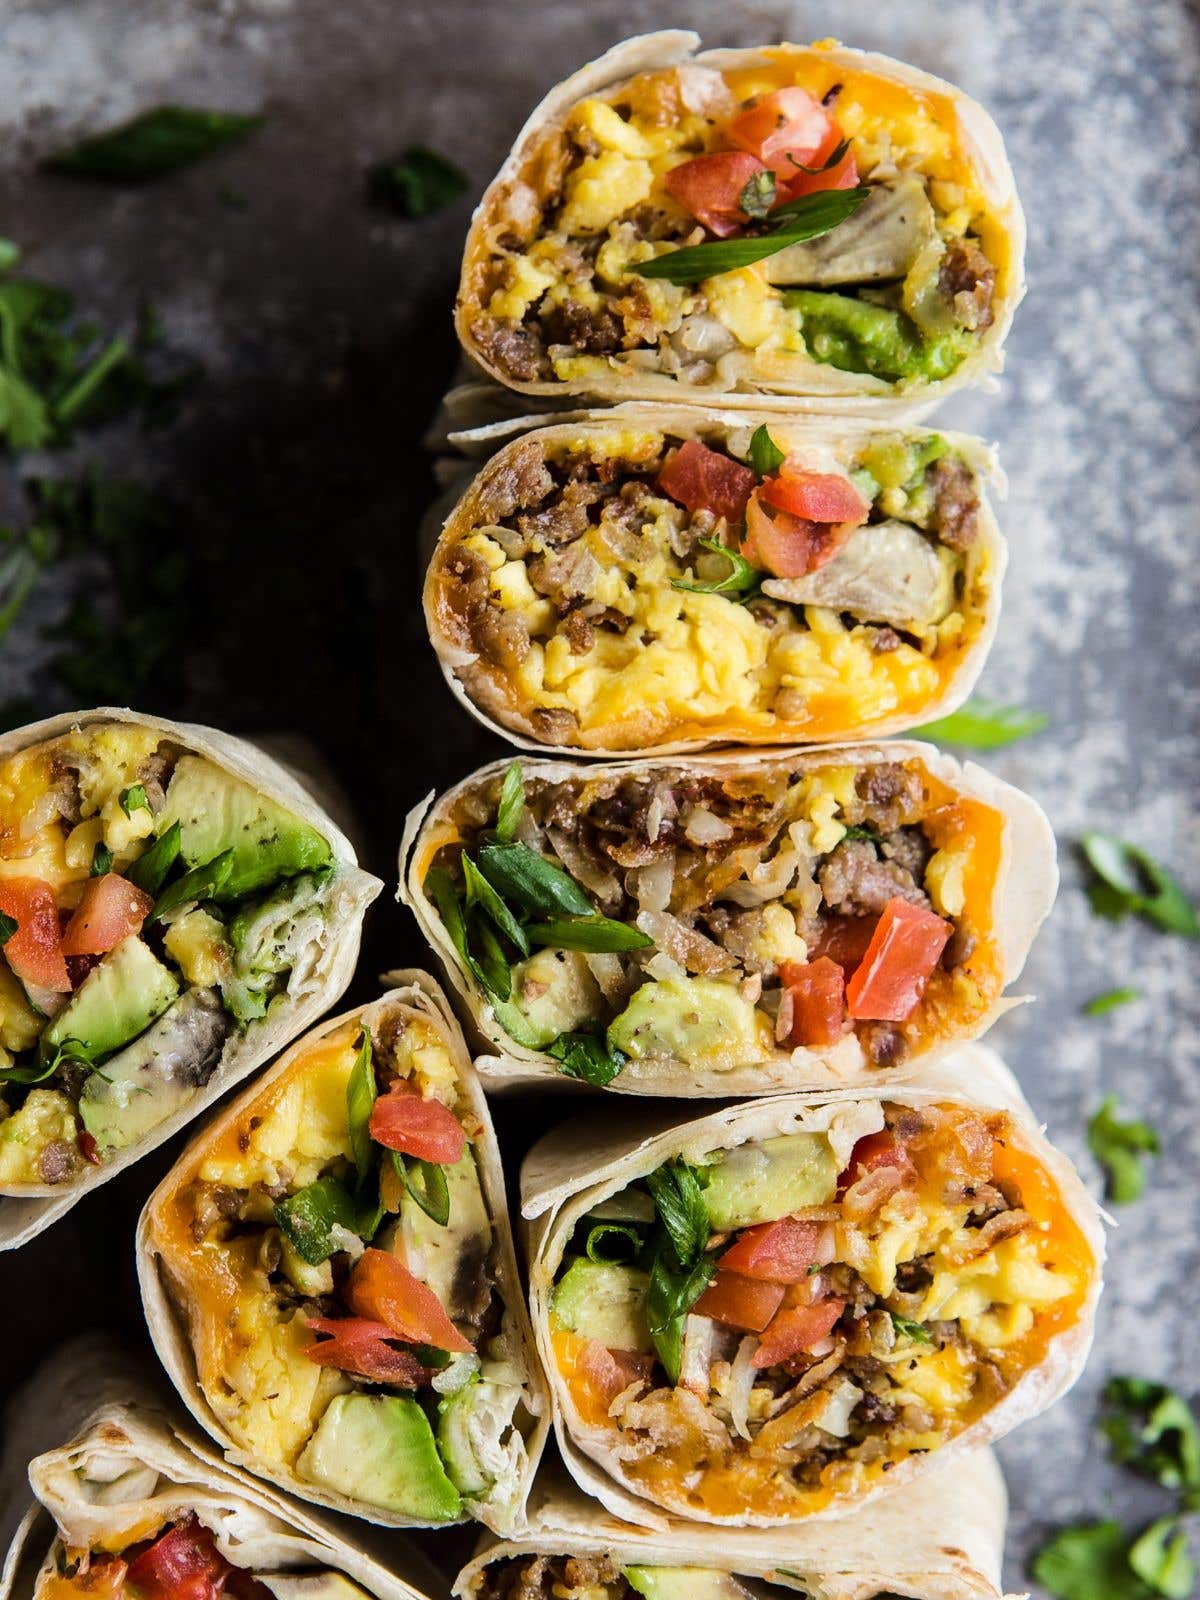 11 Breakfast Burritos That Make Getting Out of Bed Easy